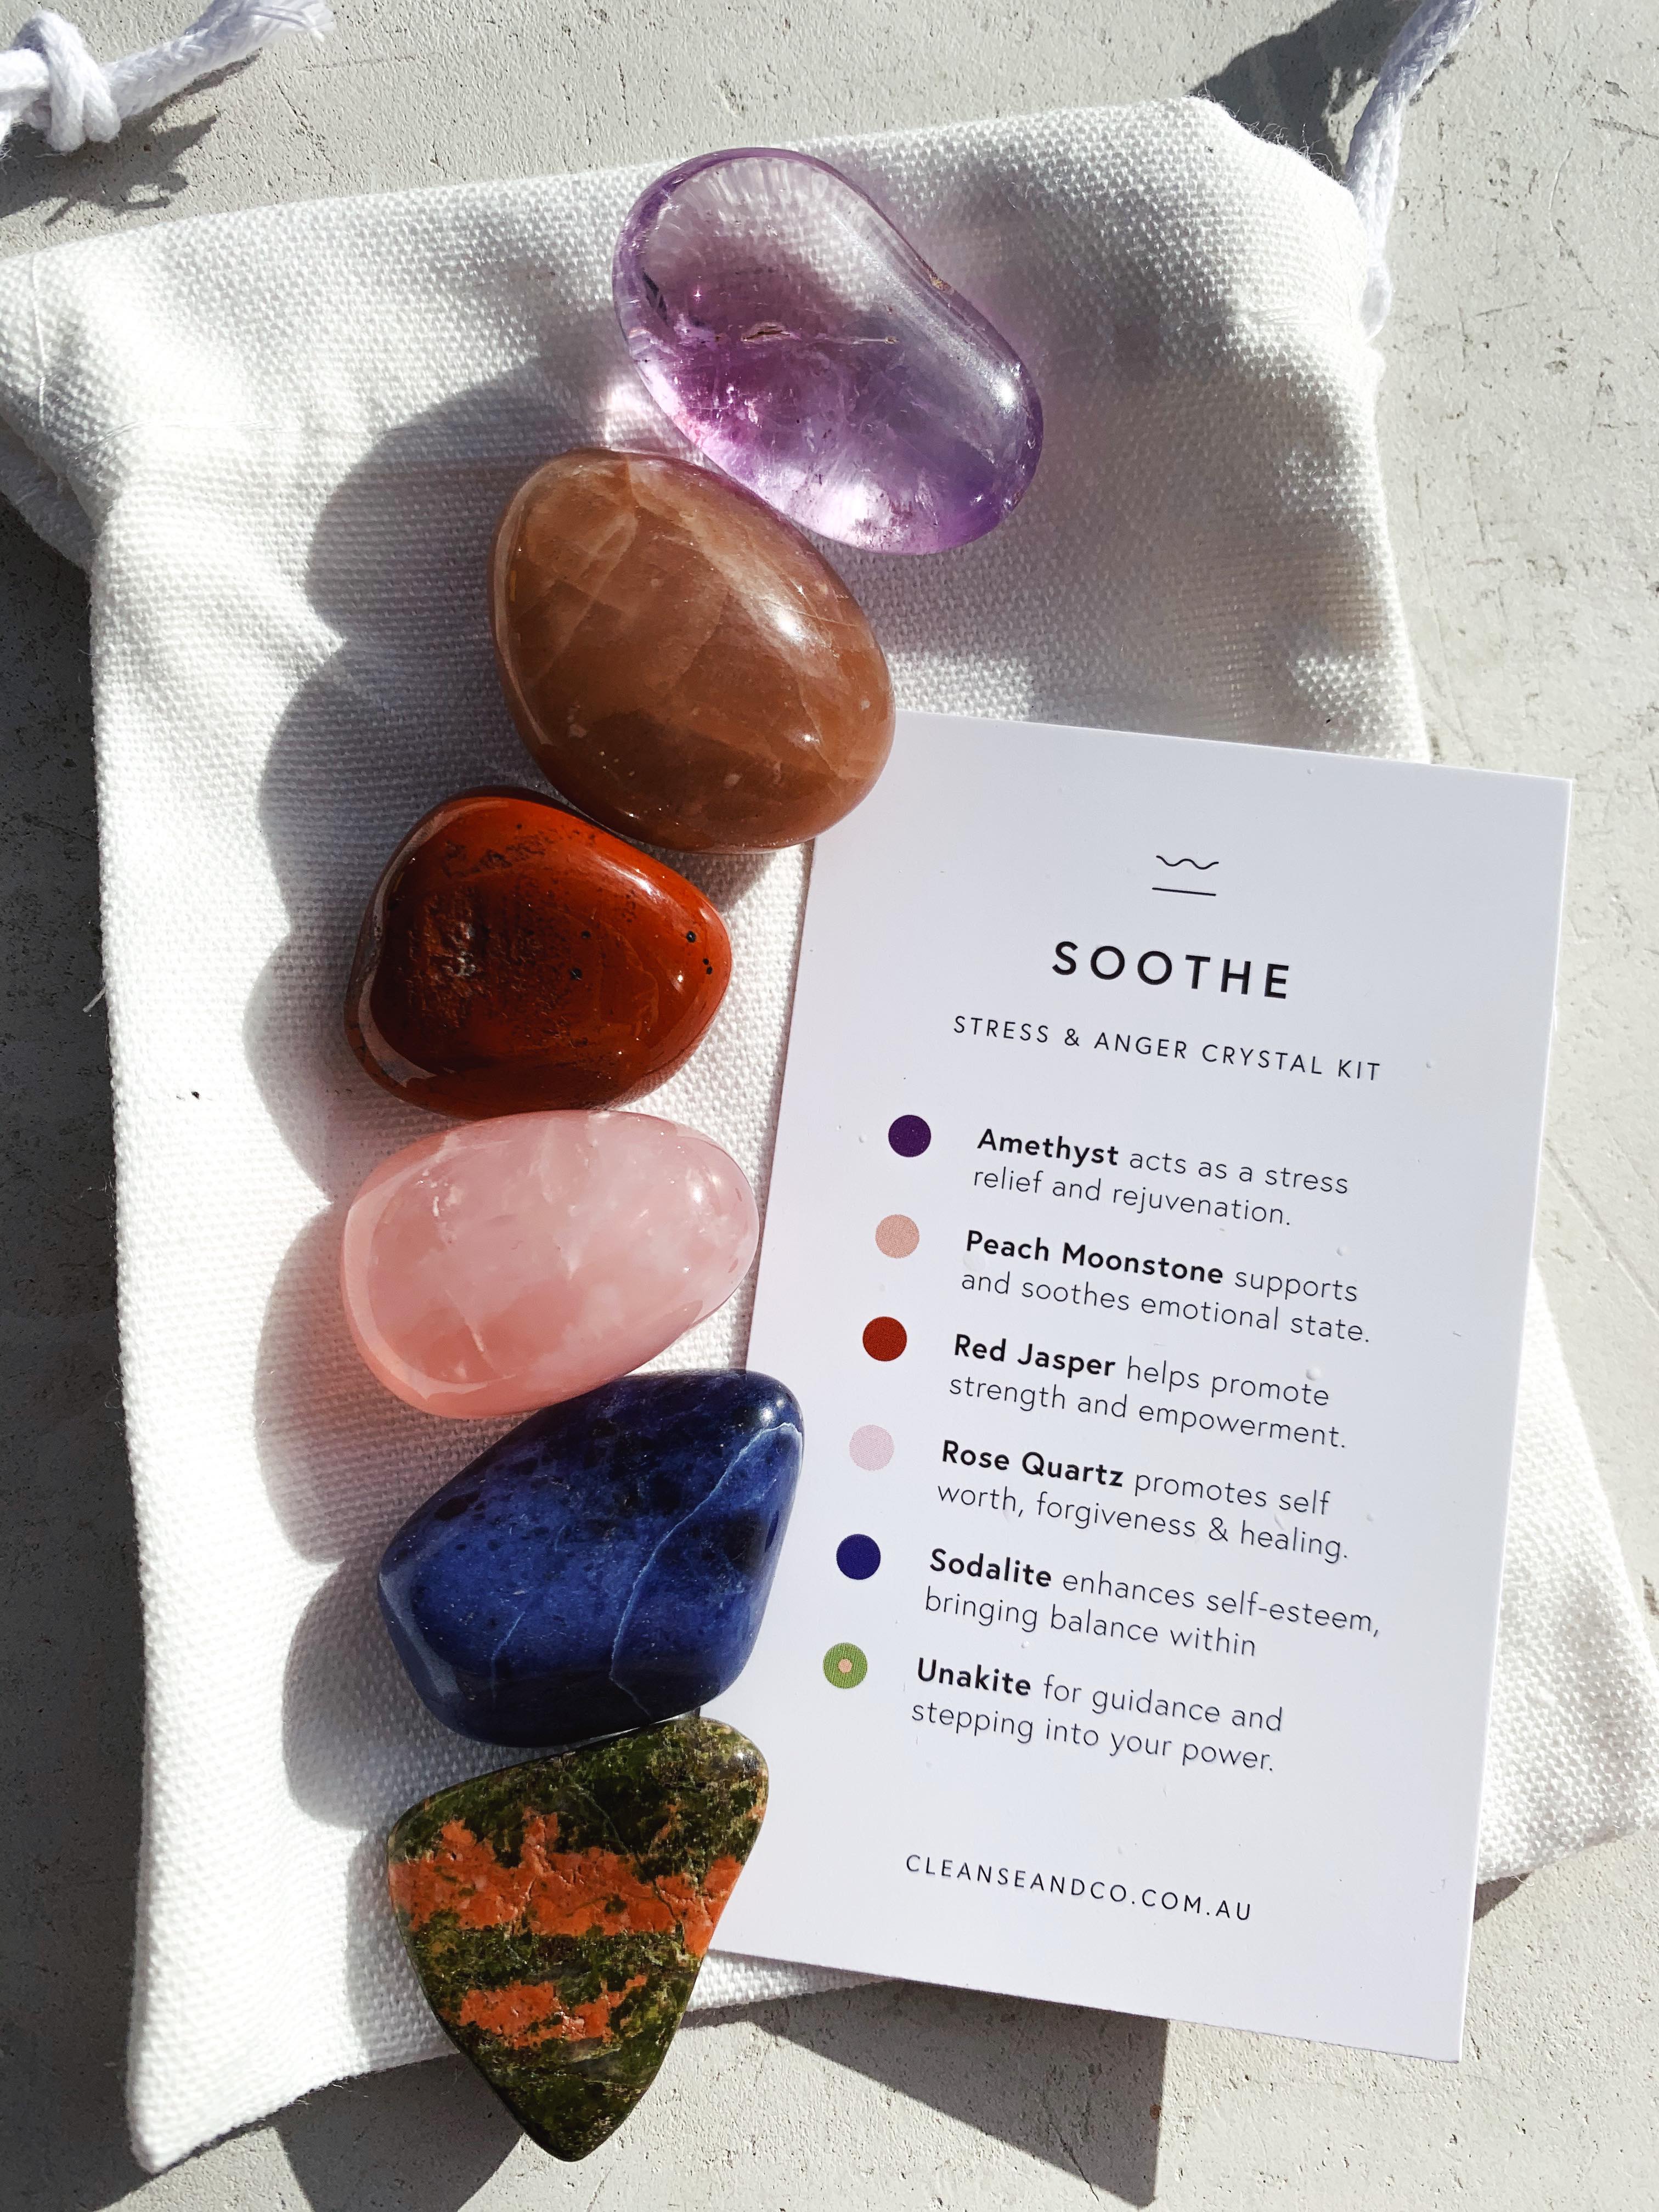 Soothe Anger & Stress Crystal Kit